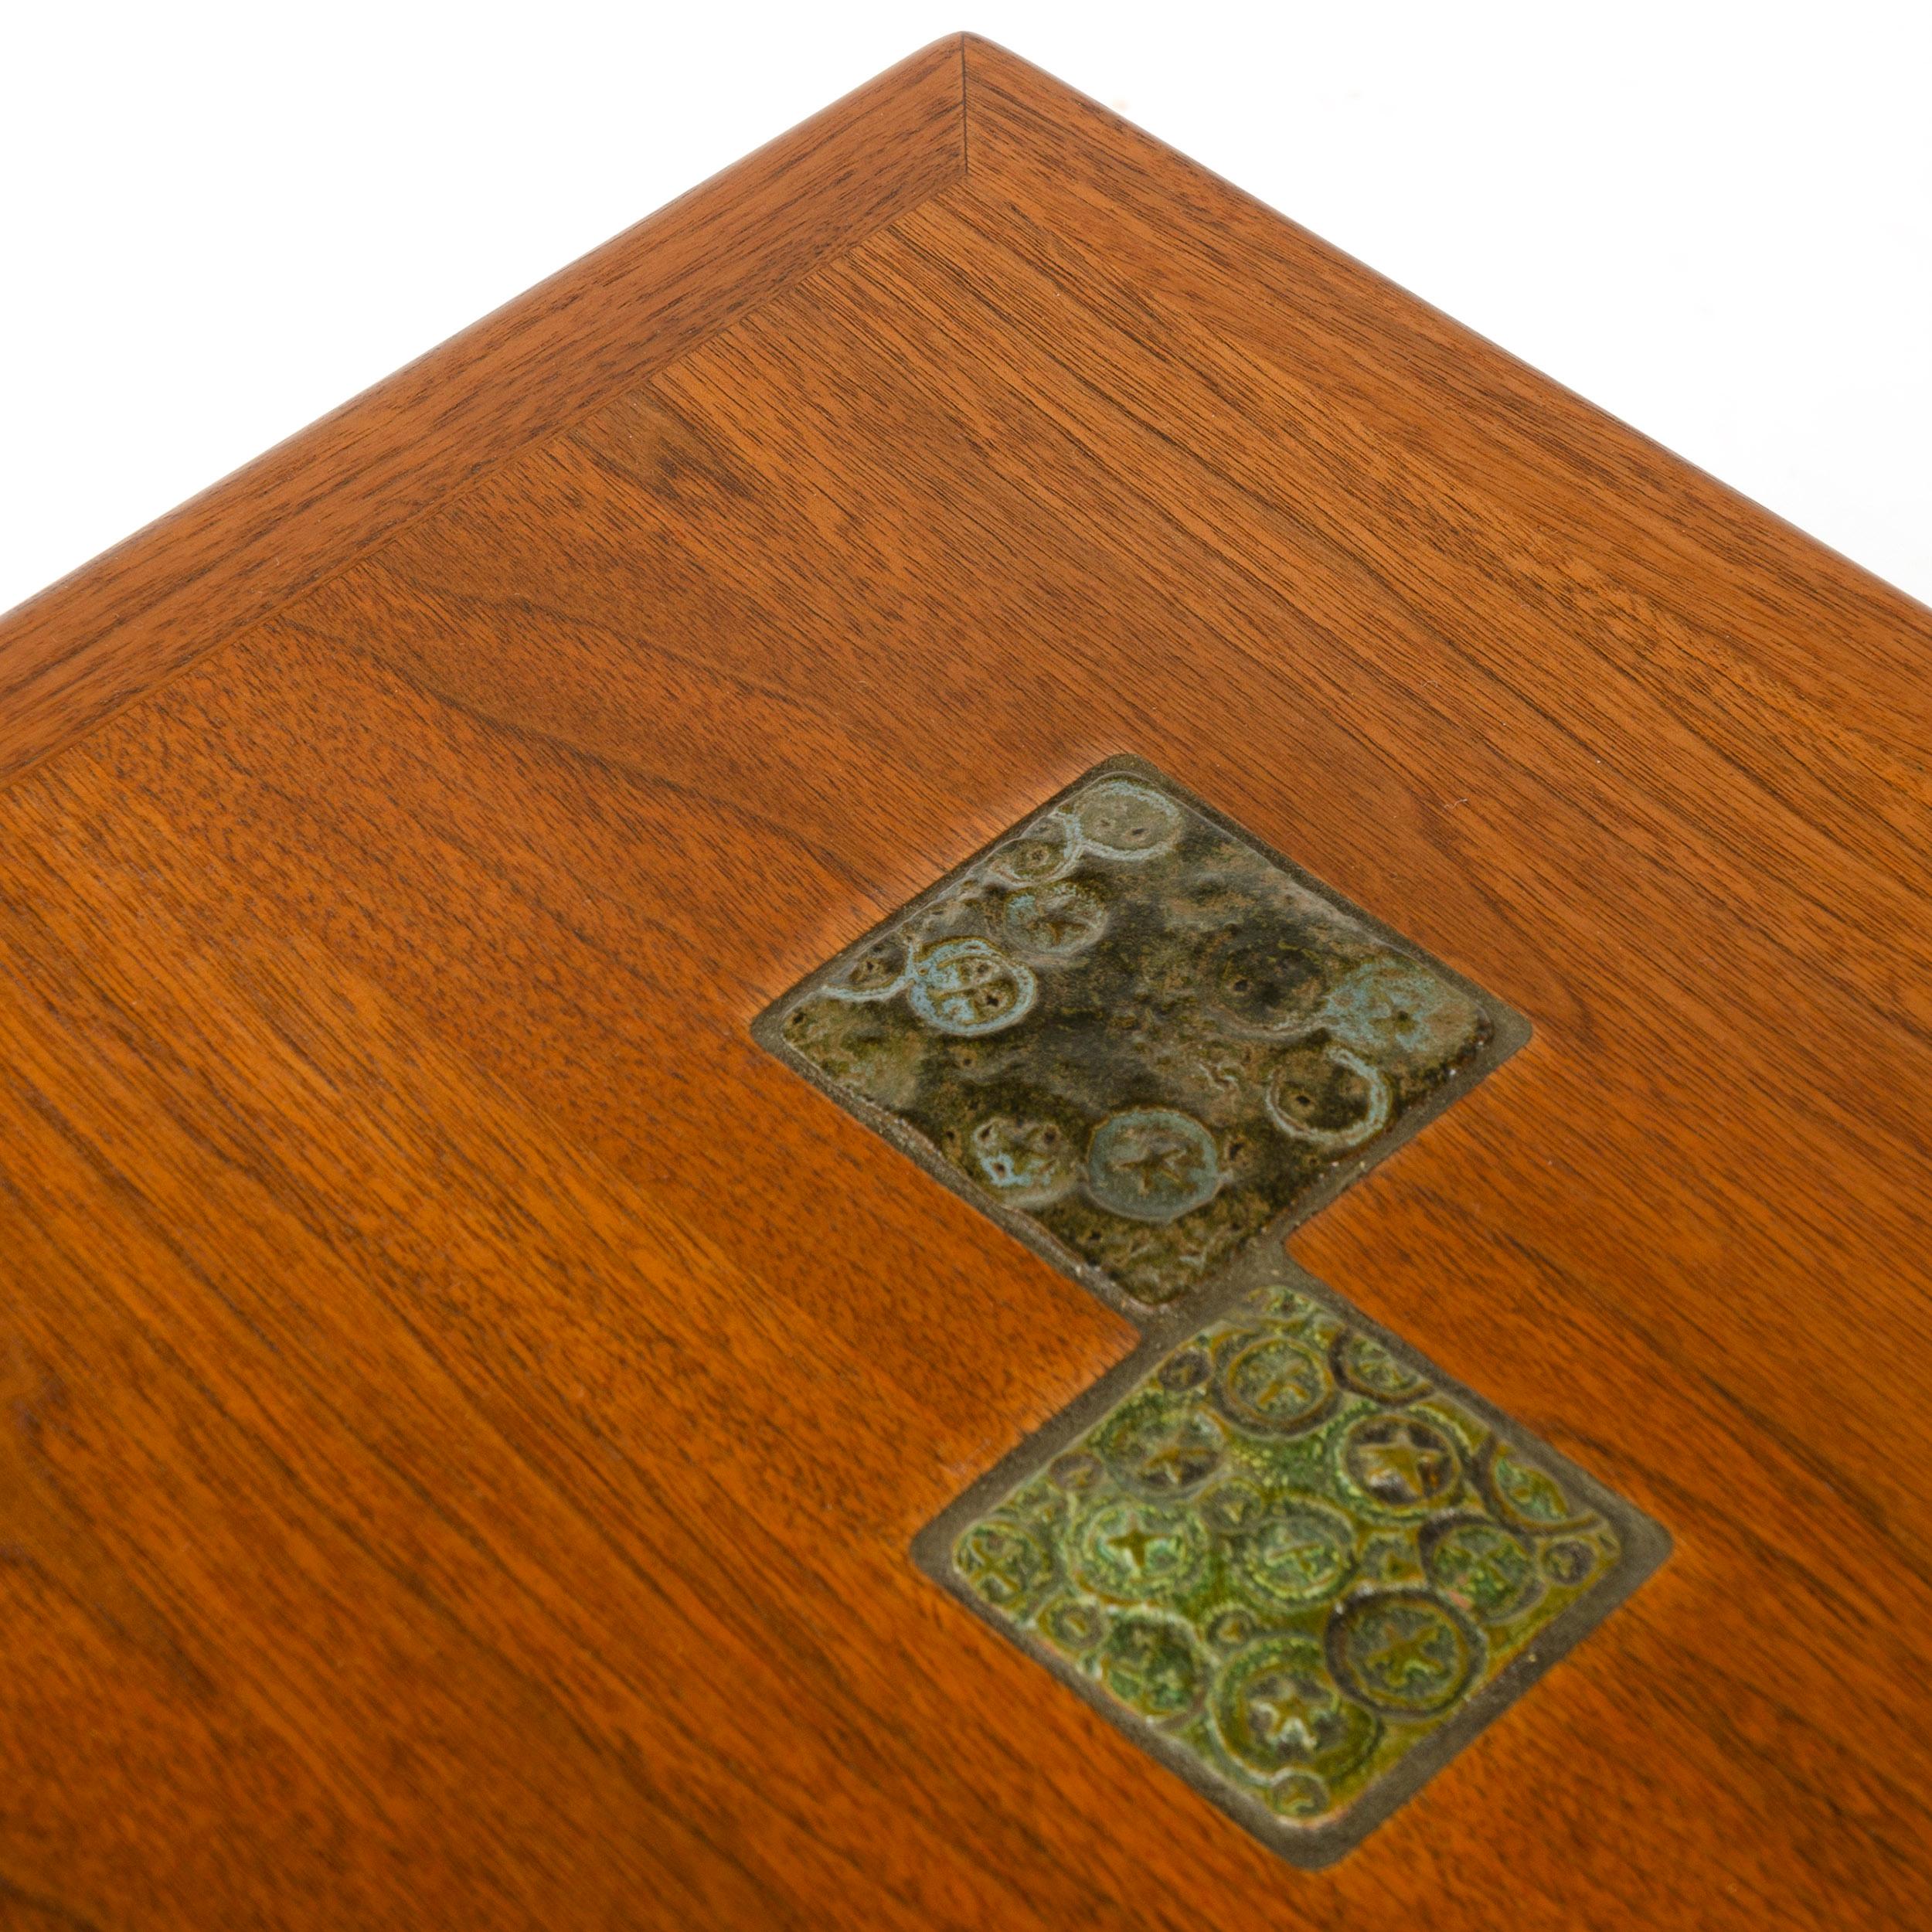 1950s Walnut 'Janus' End Table by Edward Wormley for Dunbar In Good Condition For Sale In Sagaponack, NY